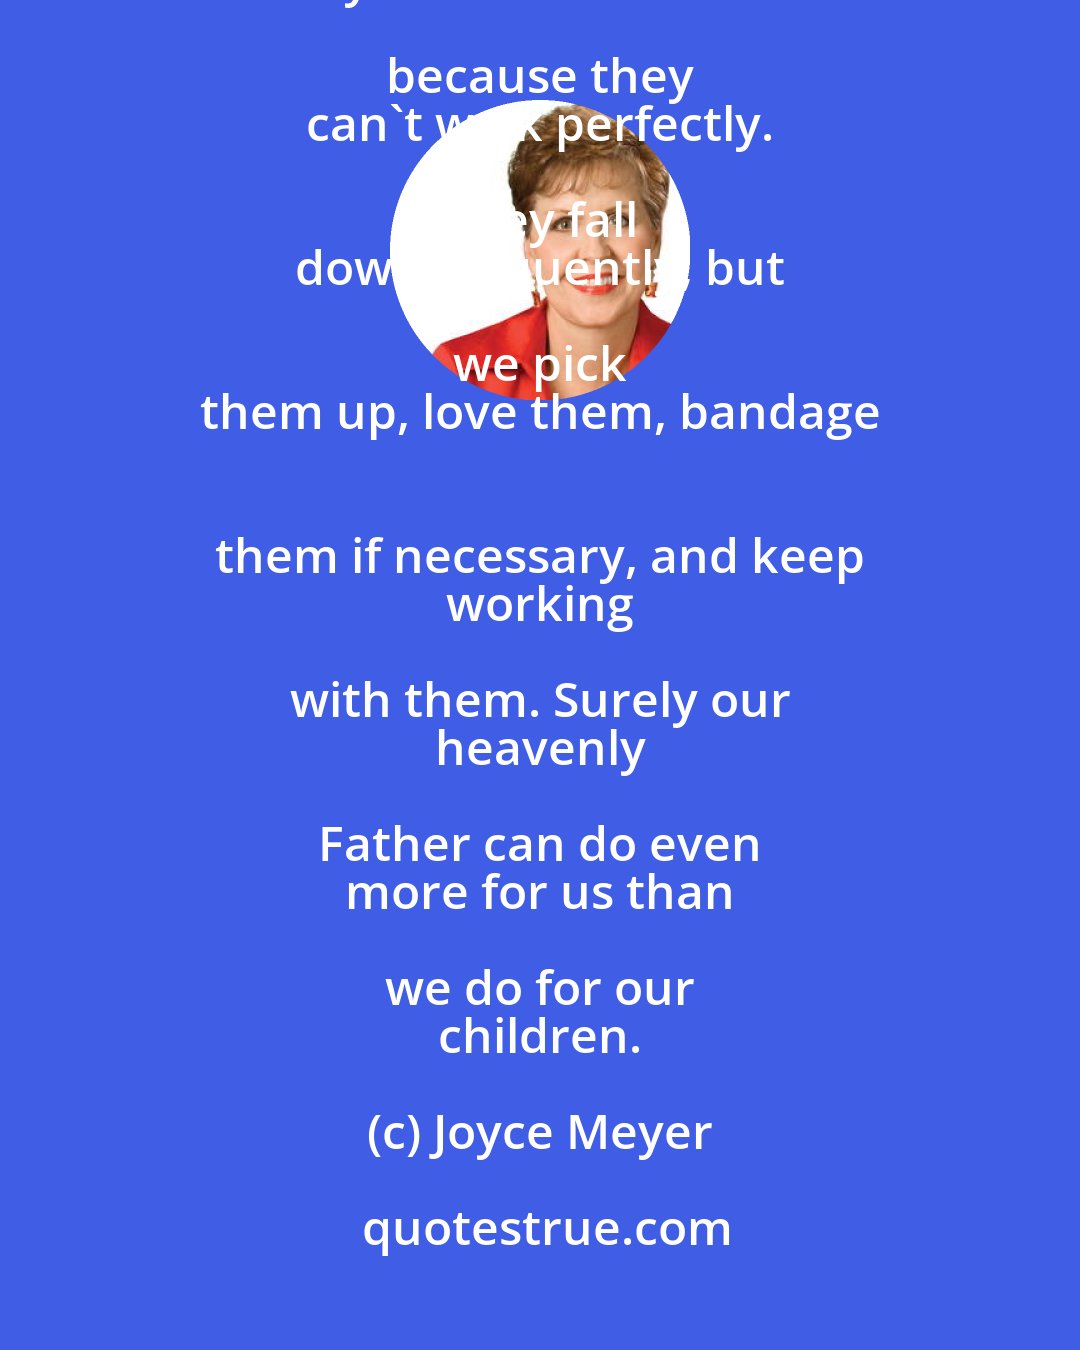 Joyce Meyer: We don't think there's 
 something wrong with one- 
 year-old children because they 
 can't walk perfectly. They fall 
 down frequently, but we pick 
 them up, love them, bandage 
 them if necessary, and keep 
 working with them. Surely our 
 heavenly Father can do even 
 more for us than we do for our 
 children.